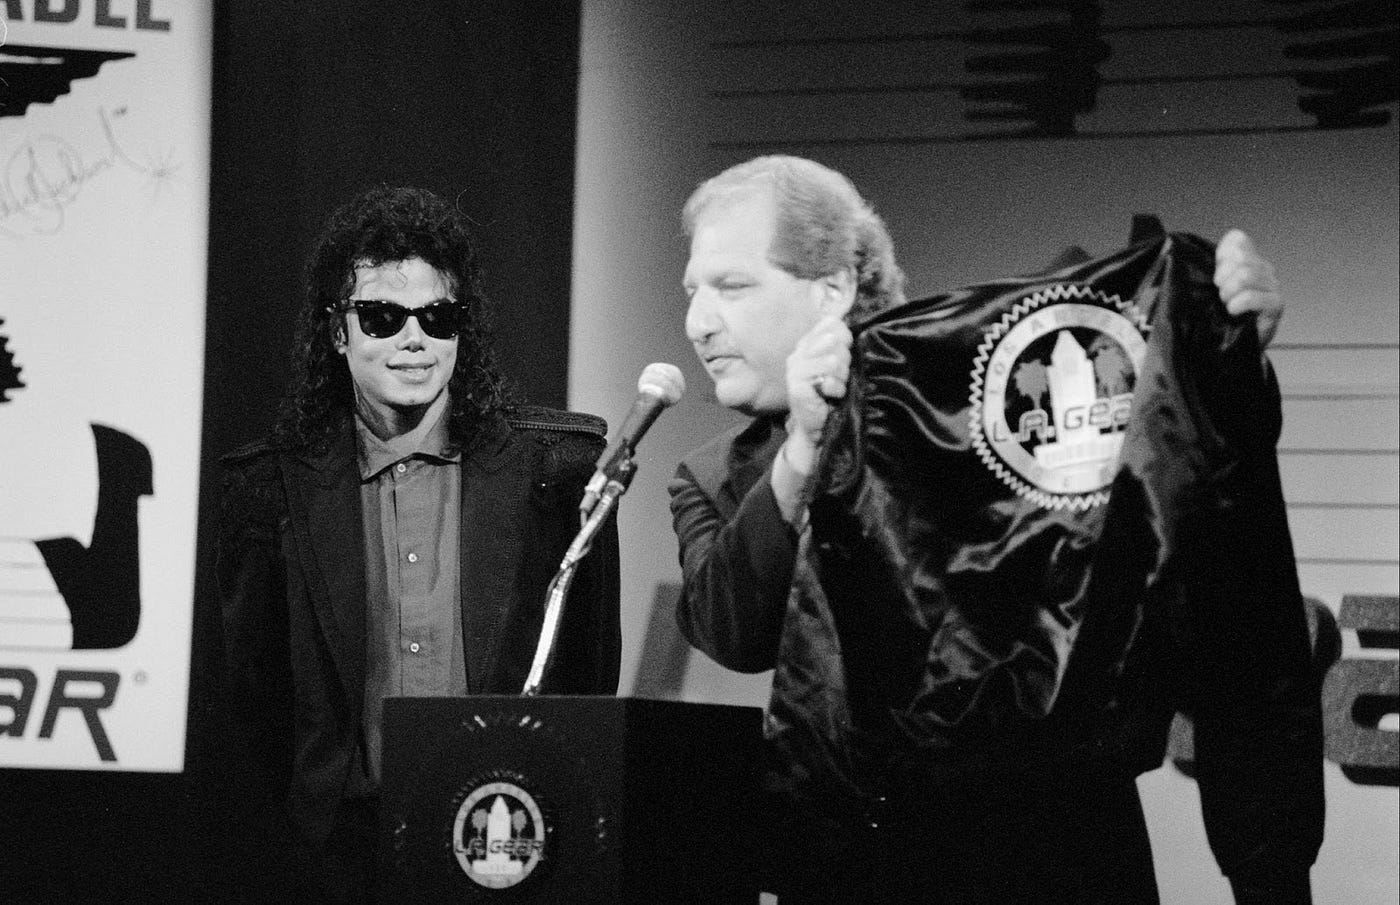 Michael Jackson & The Fall Of L.A. Gear, by the detail.